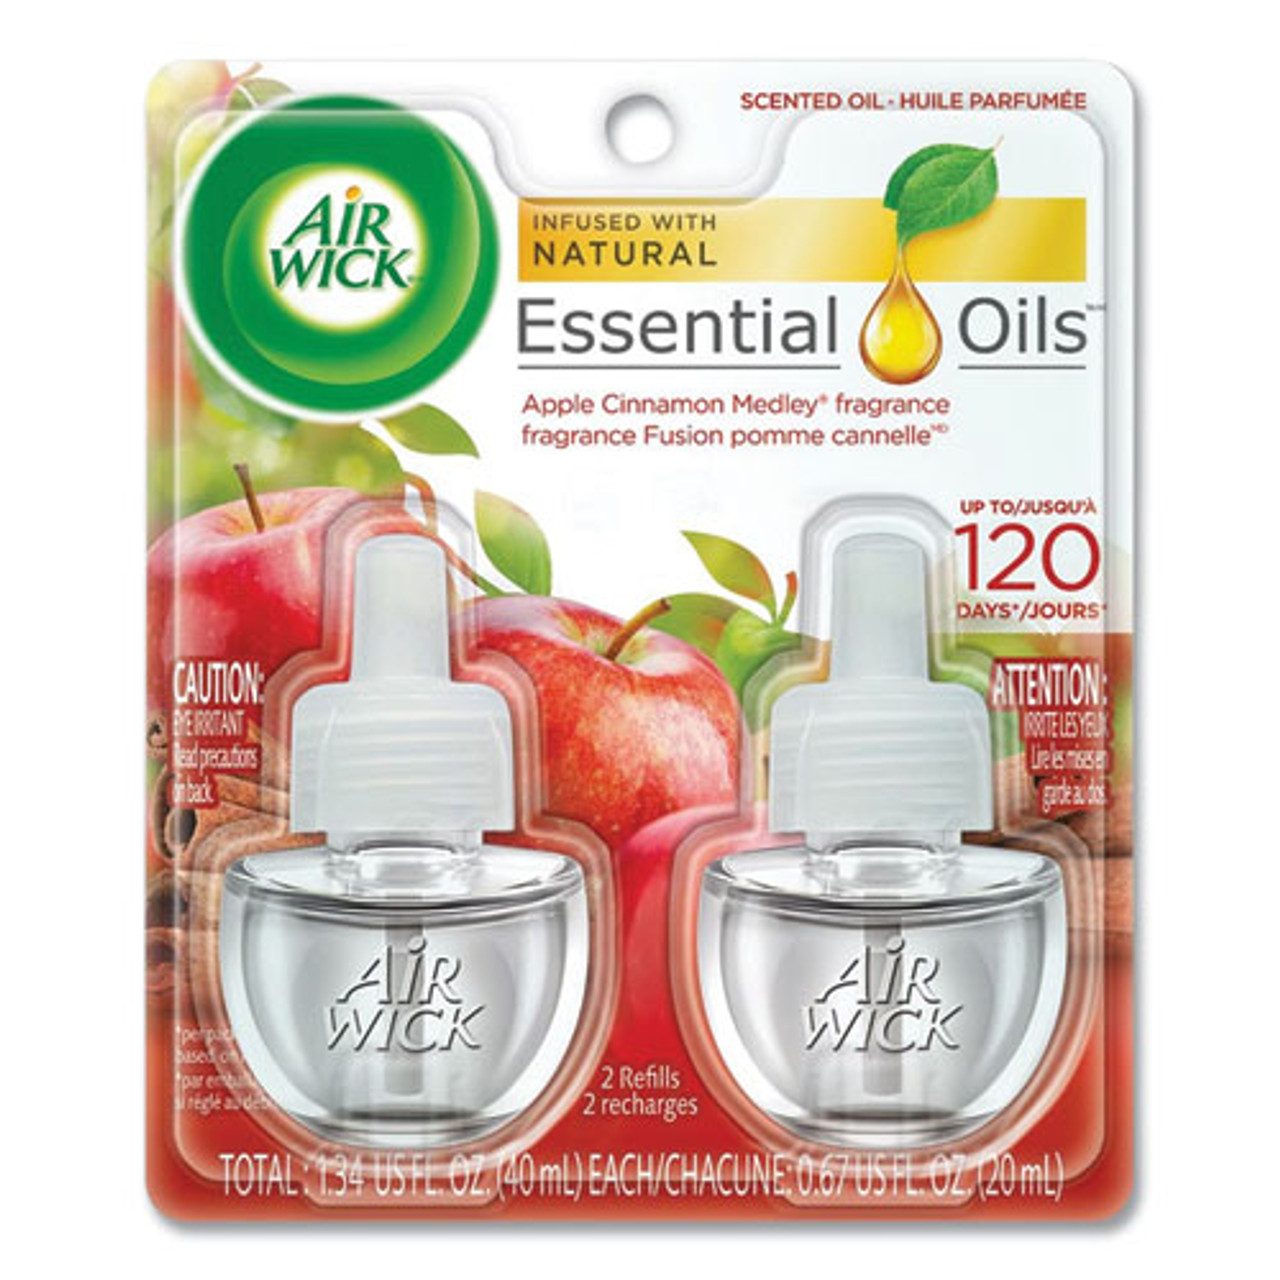 Air Wick Scented Oil Refill, Warming - Apple Cinnamon Medley, 0.67 oz, 2/Pack